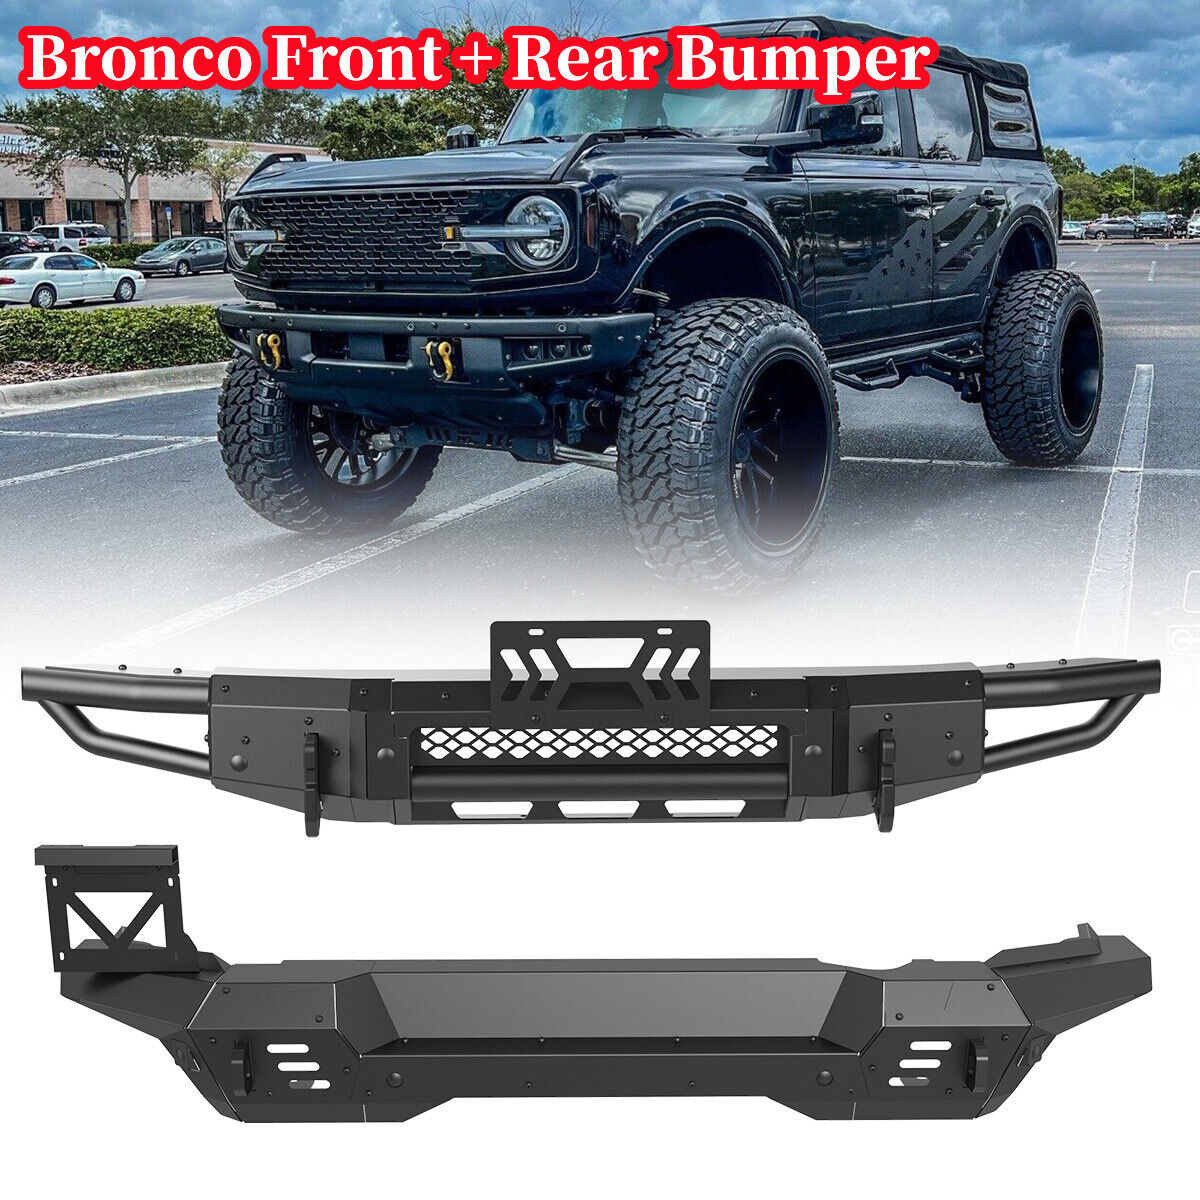 Bronco Front + Rear Bumper w/D-Ring Mounts For 2021 2022 2023 Ford Bronco Steel